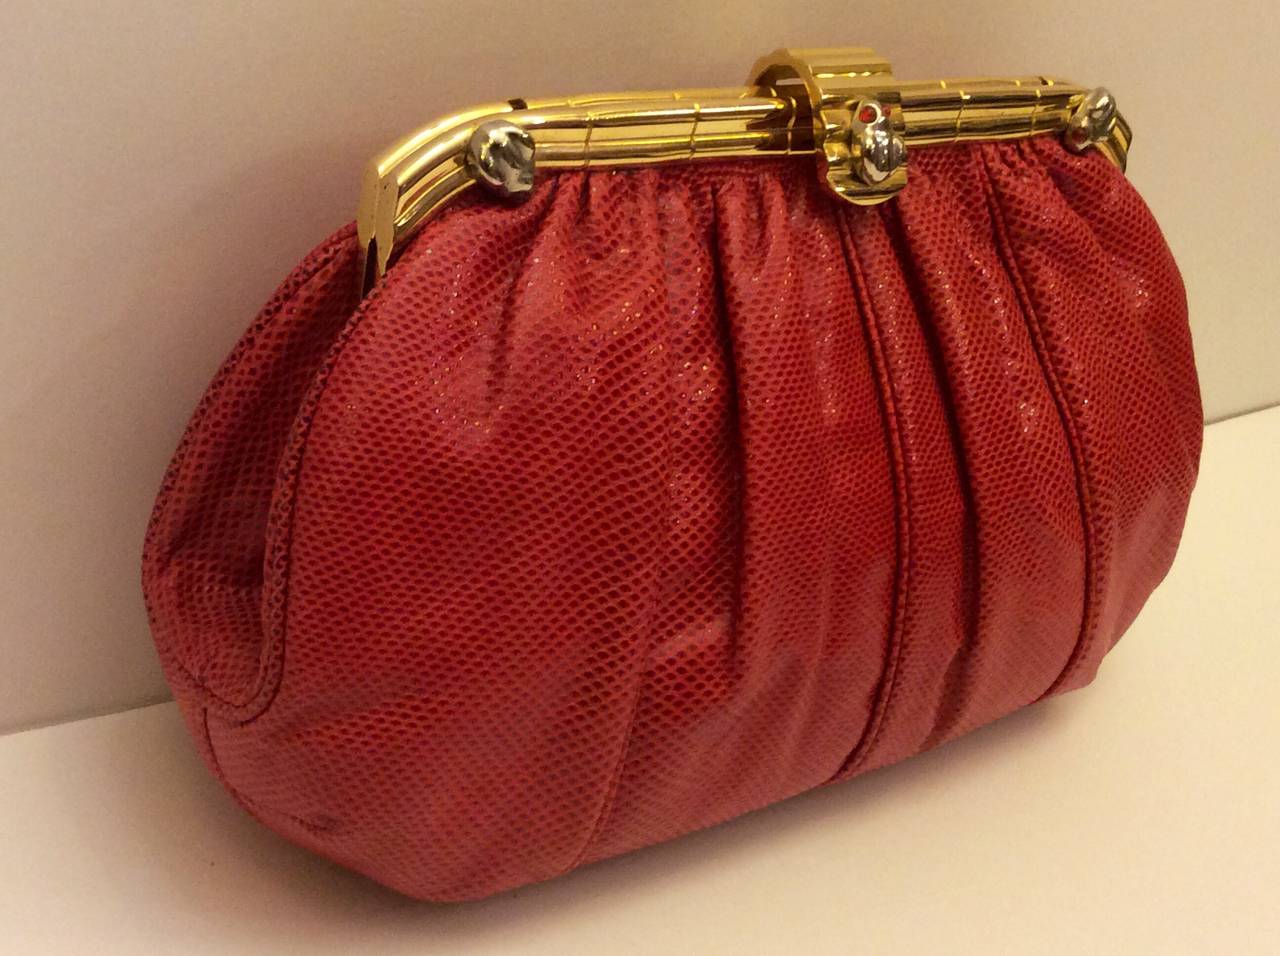 This is a gorgeous Judith Leiber clutch with optional chain. The handbag is composed of a striking red lizard with gather details. There are two interior slot & zipper compartments and snap closures, and gold hardware and 3 small frog detail.